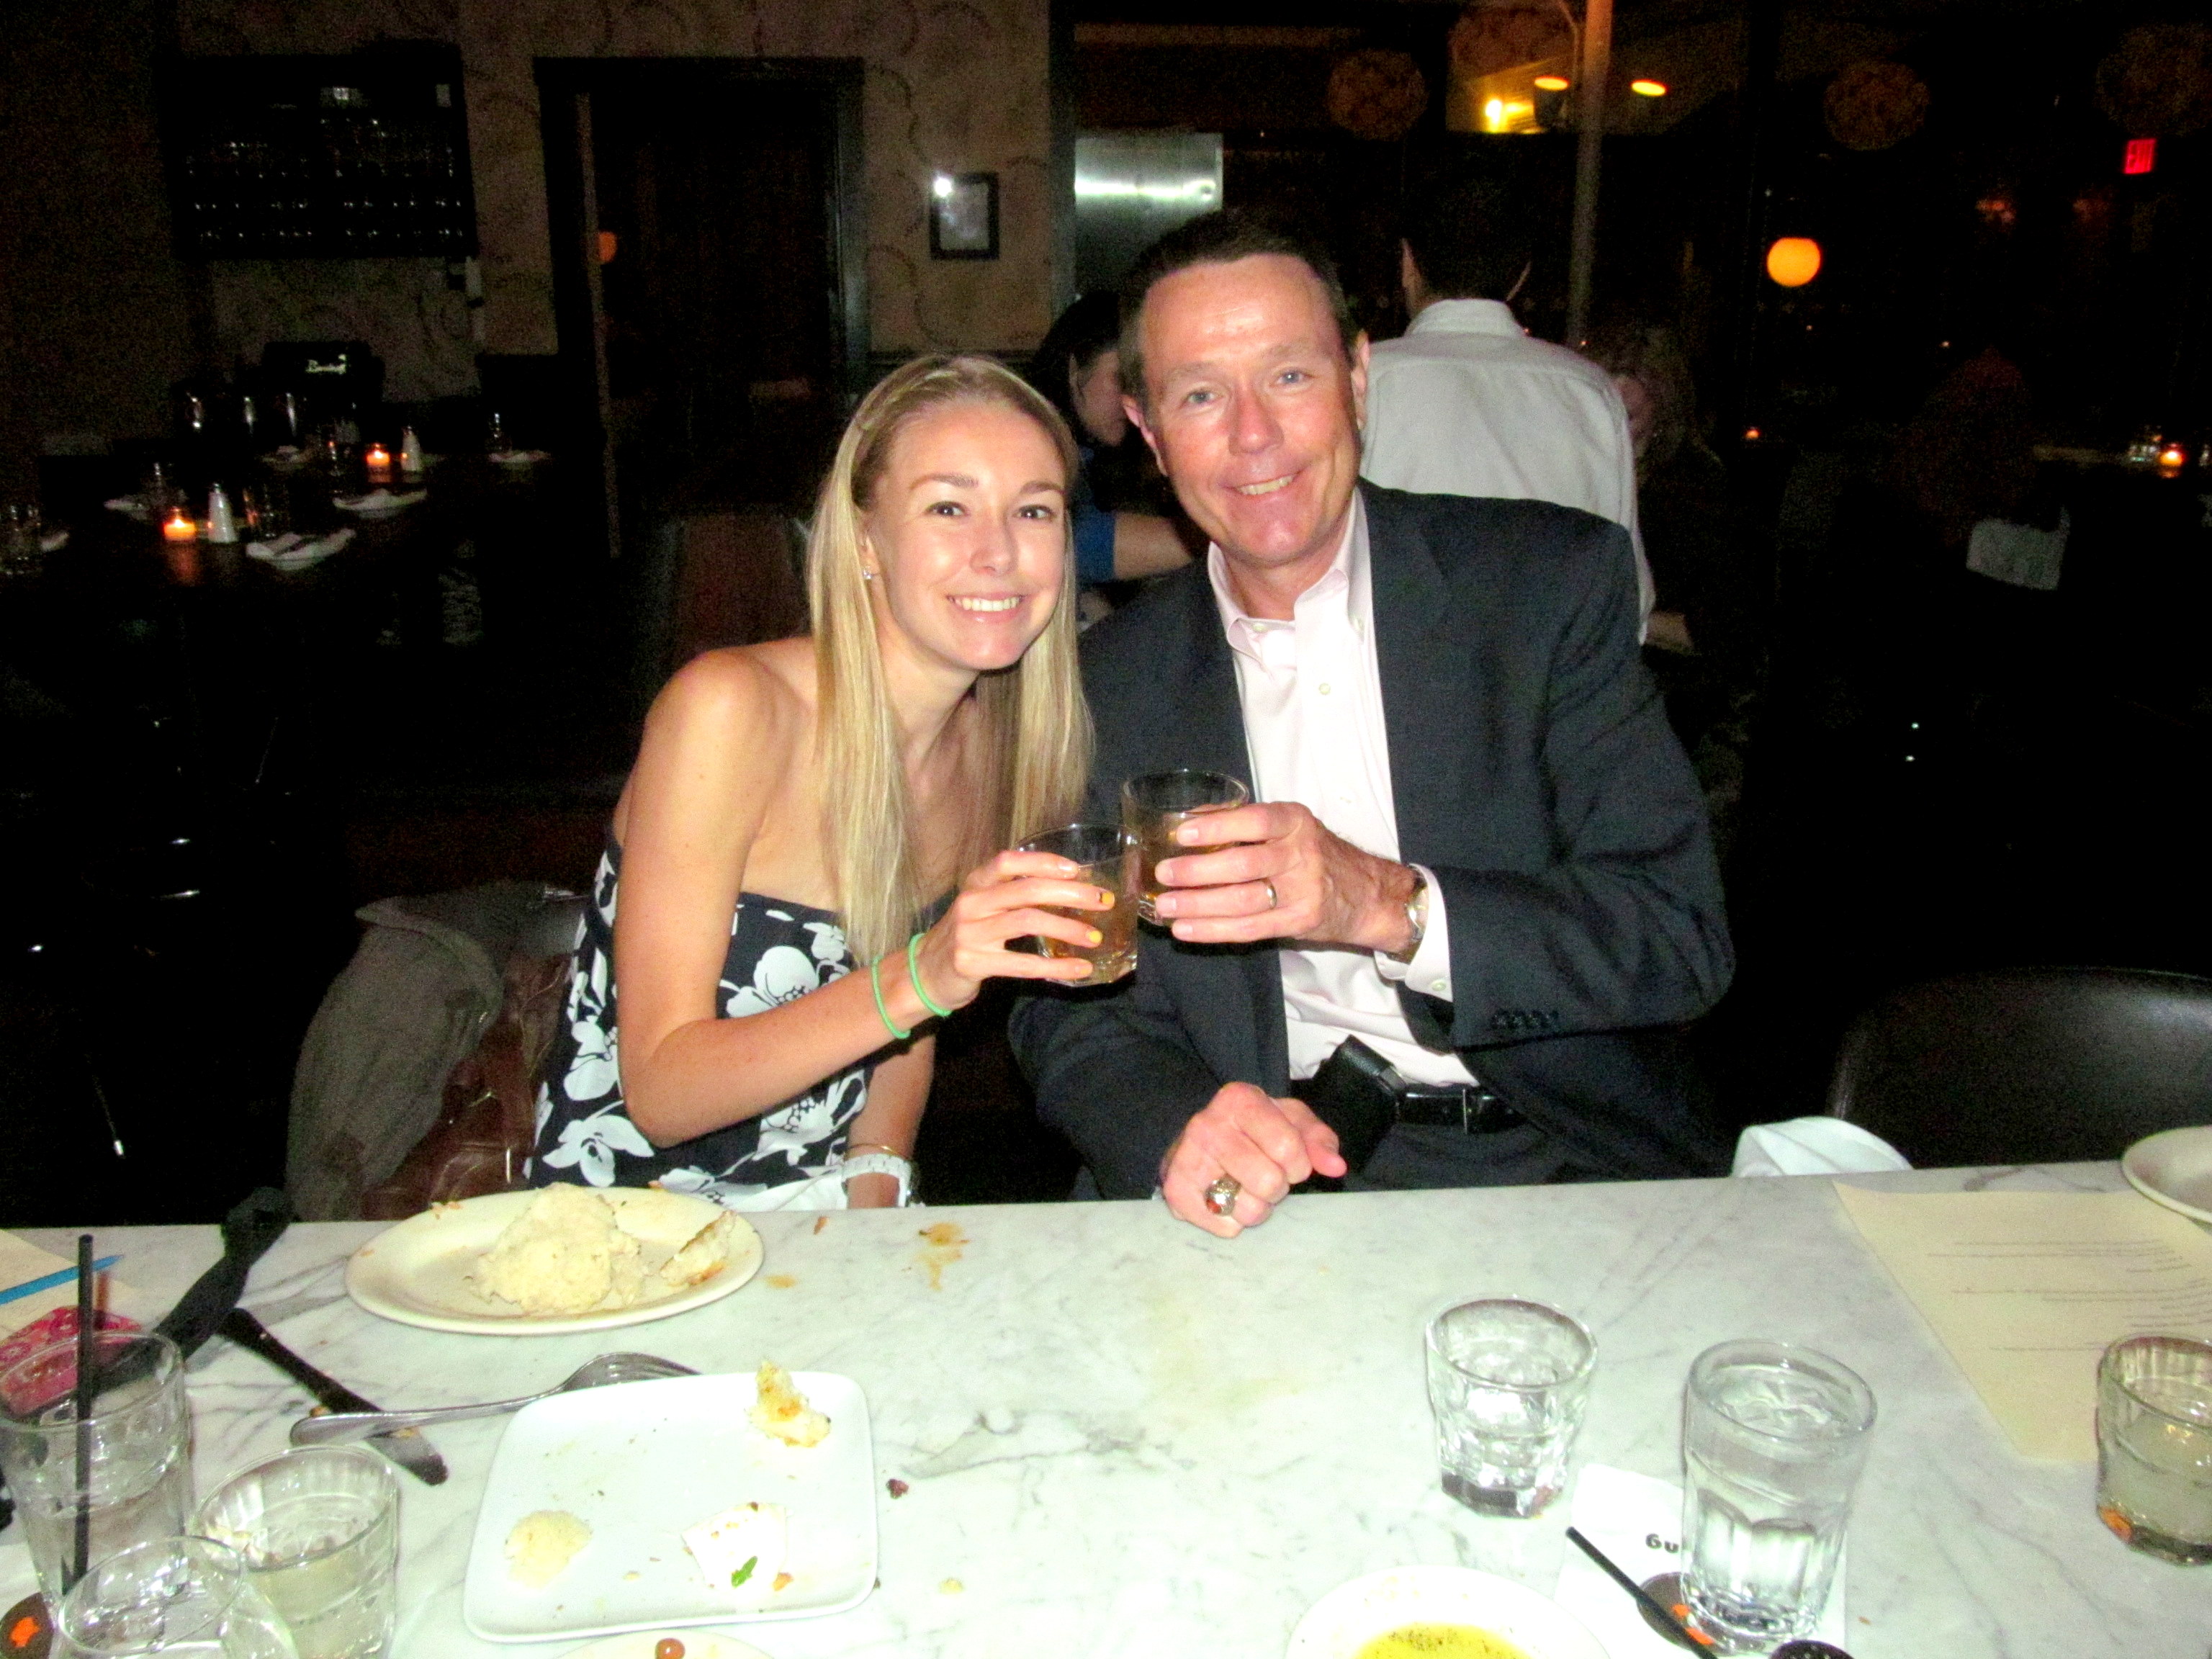 Cheers to an amazing dad!